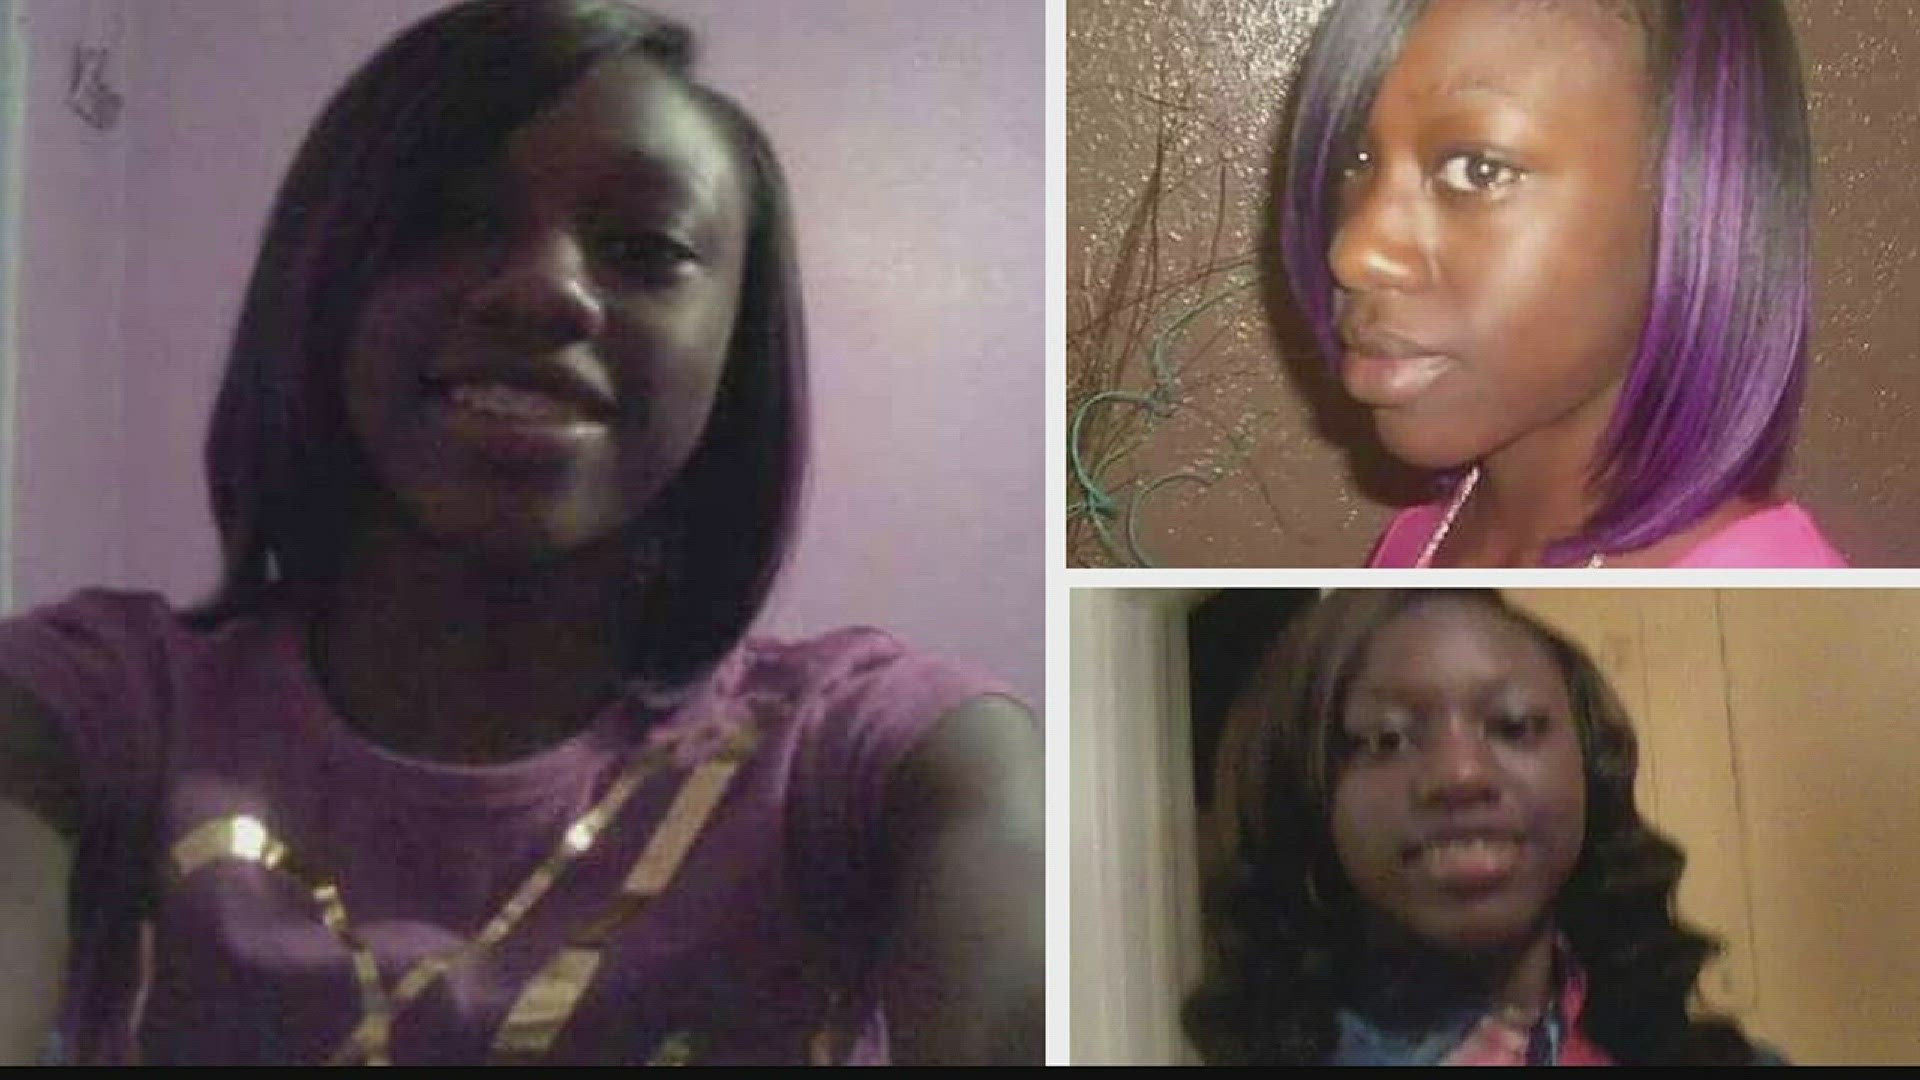 16-year-old Tiphne Hollis was shot to death in 2010. Her case has gone cold and the killer is still out there.